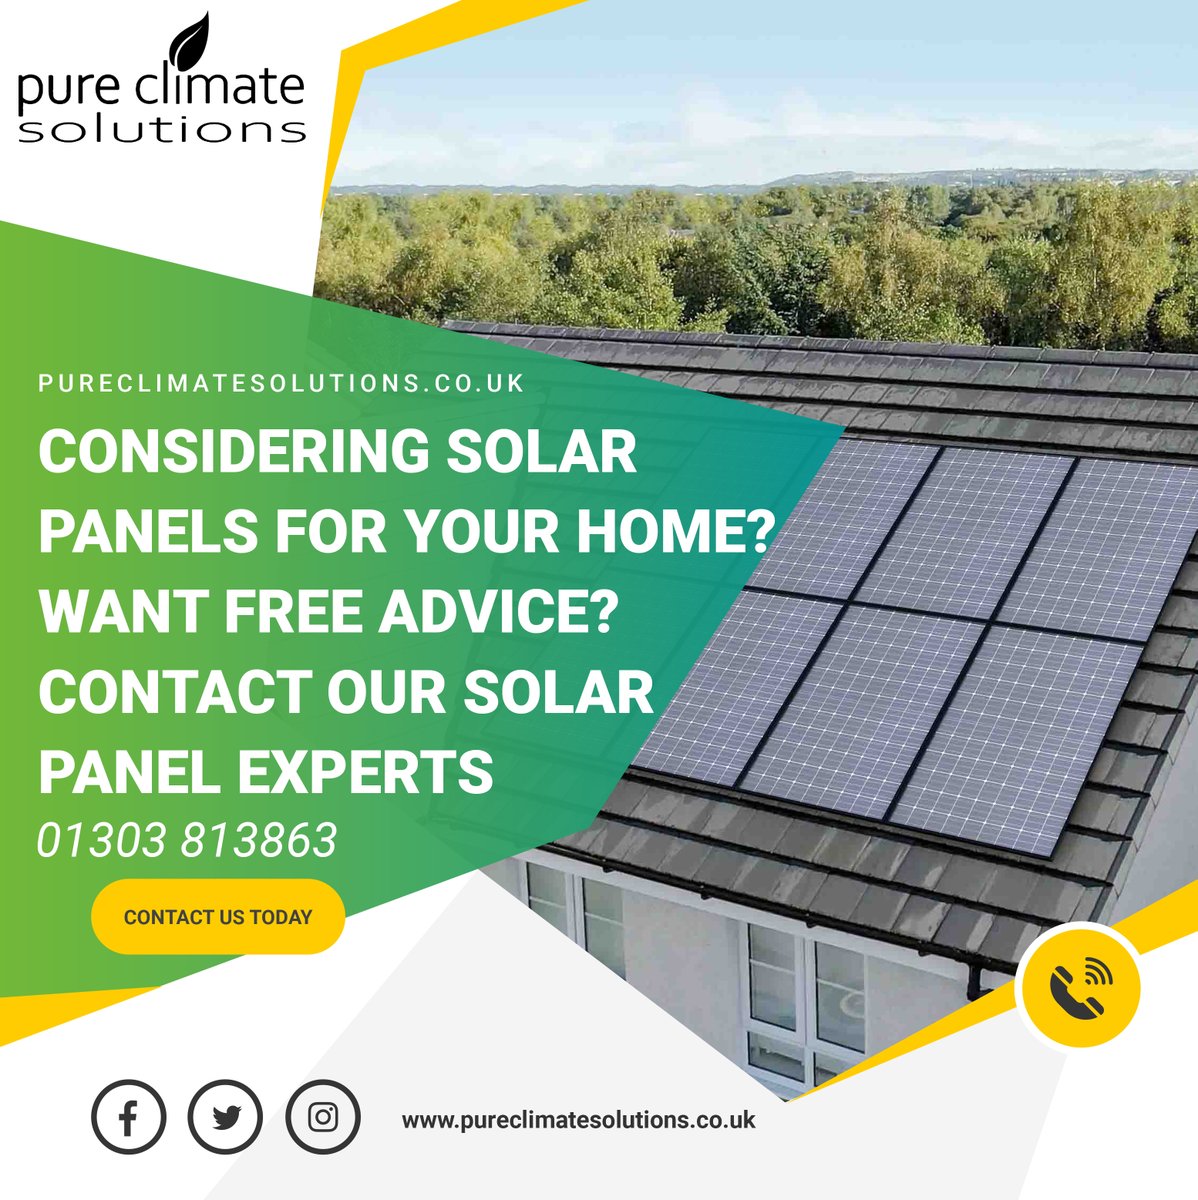 Looking for solar panels for your home or business? Dont know where to start? Speak to our friendly team today 01303813863 or pureclimatesolutions.co.uk #solar #solarpanels #solarinstall #solarinstallation